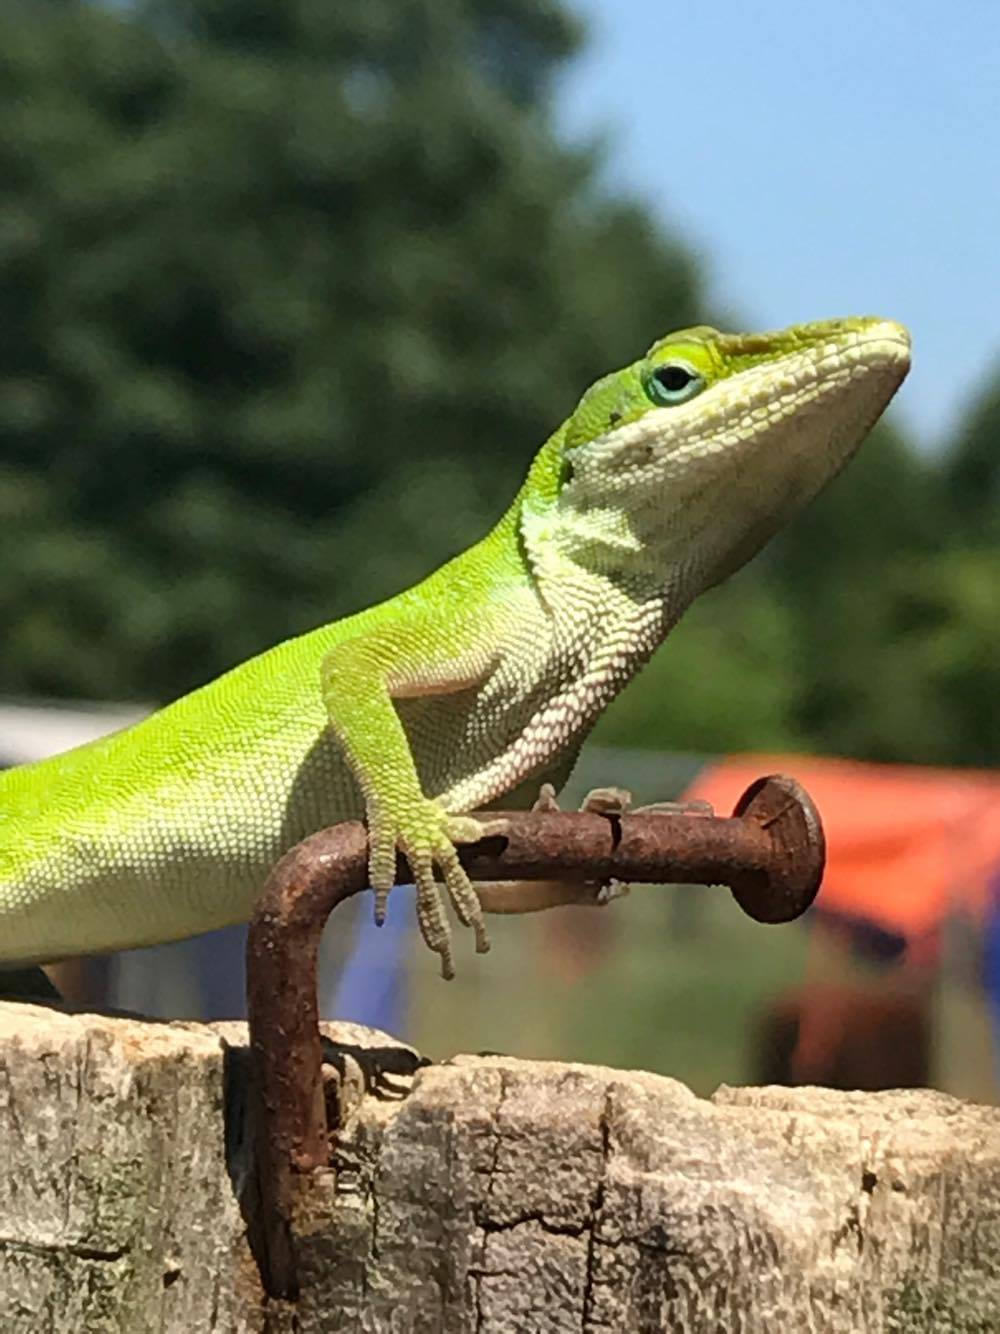 Green Anole photo by Bronc Rice